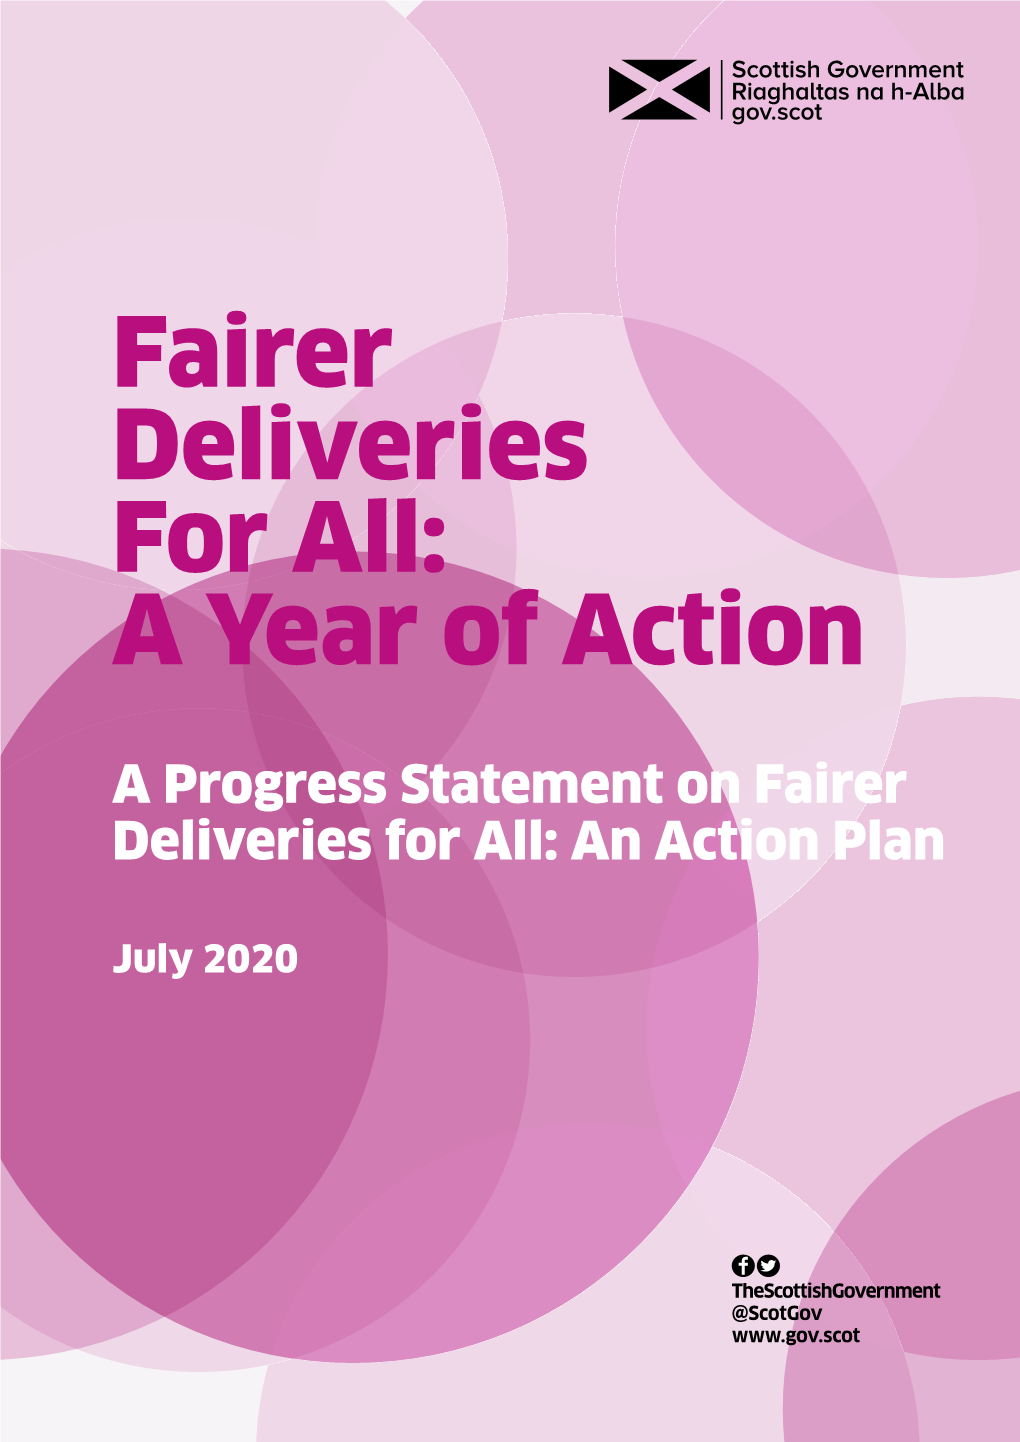 Fairer Deliveries for All: a Year of Action